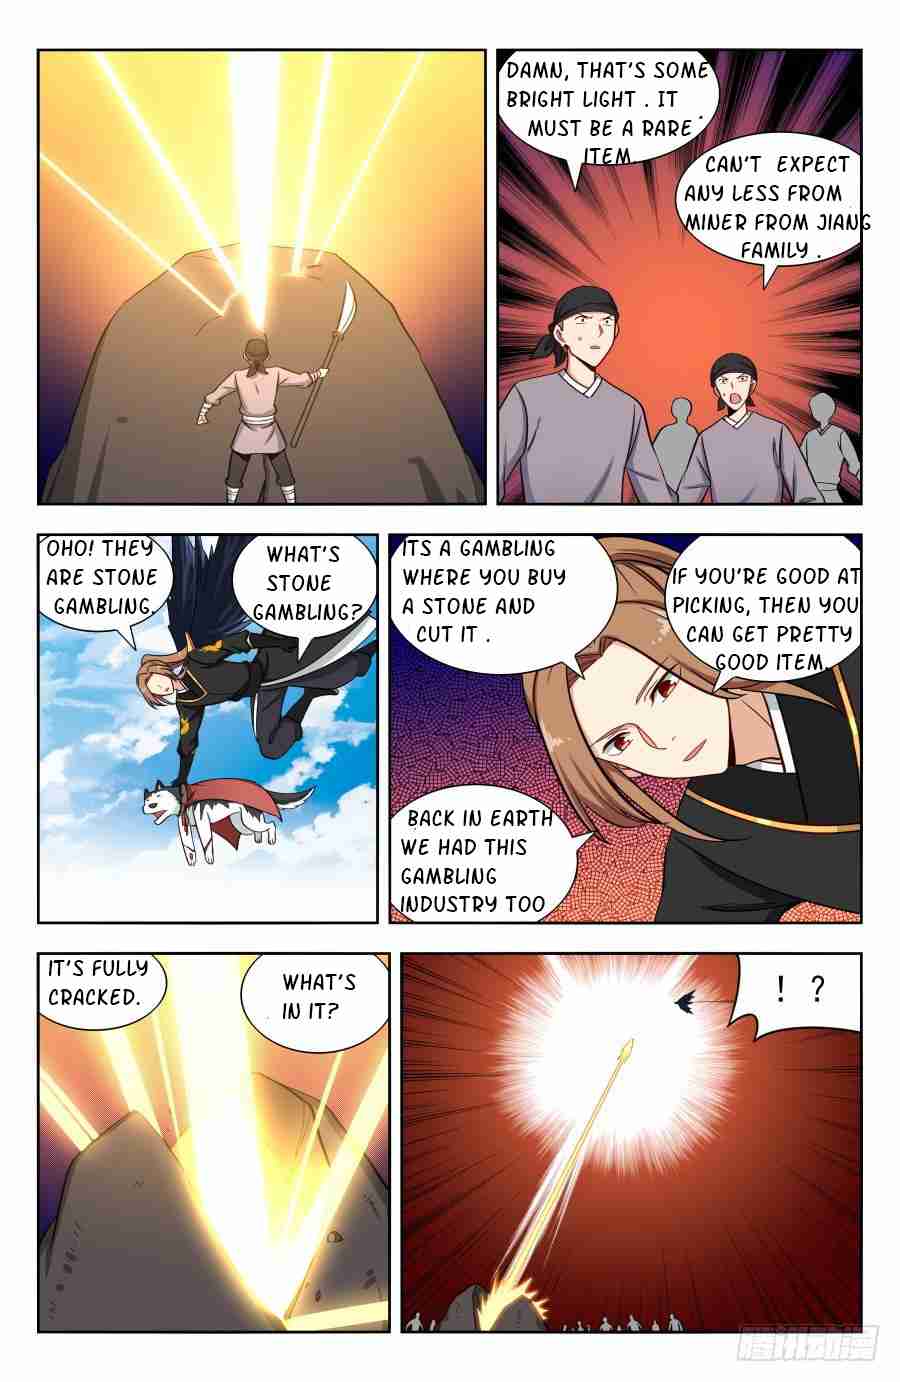 Ultimate Scheming System Ch. 165